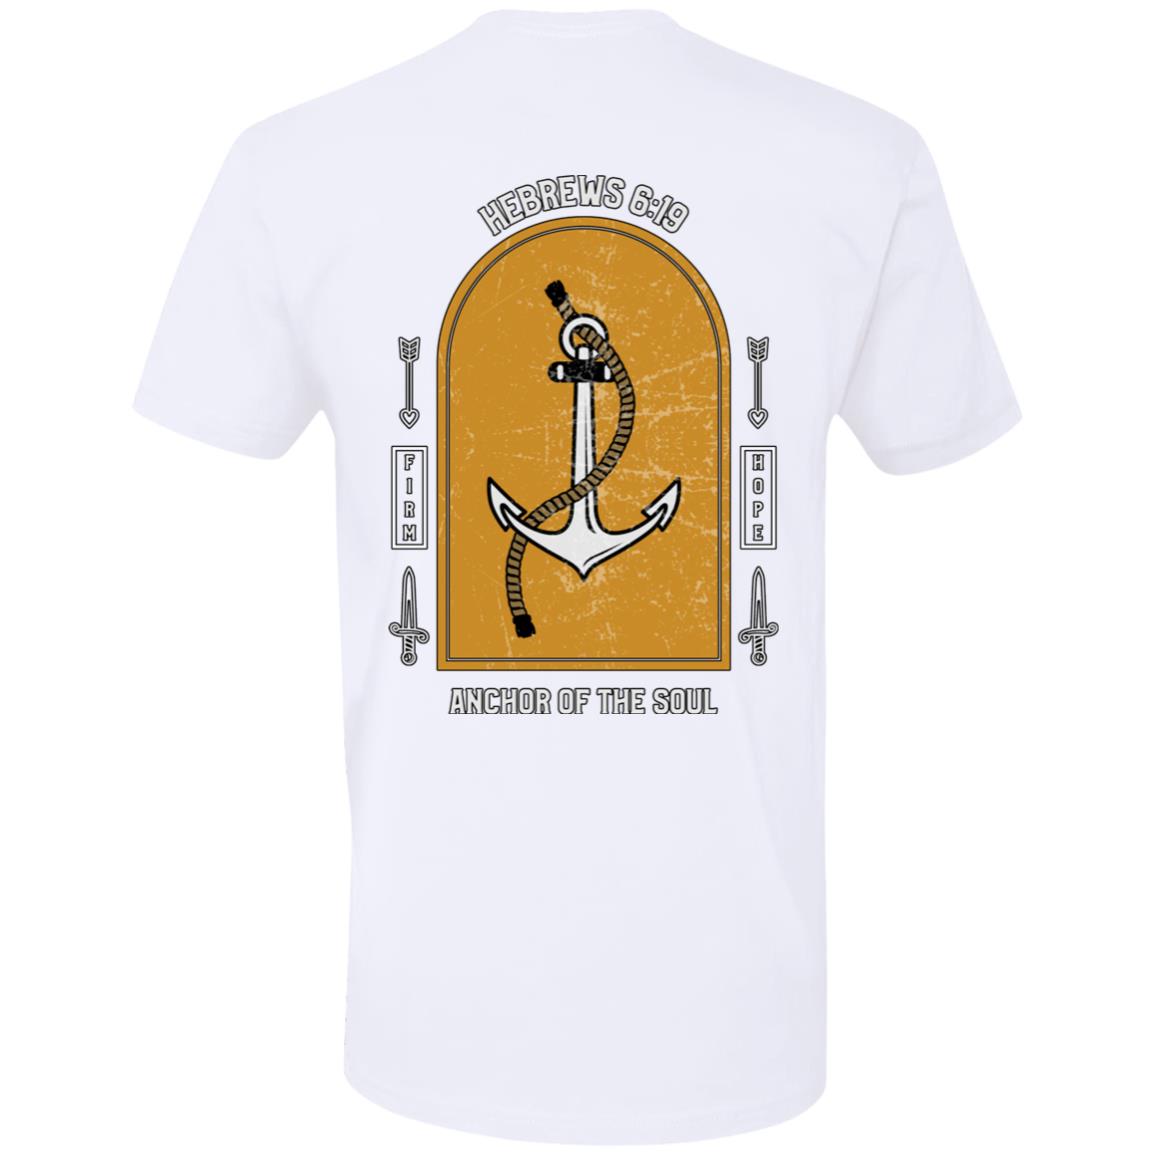 Anchor of the Soul (Unisex Tee)